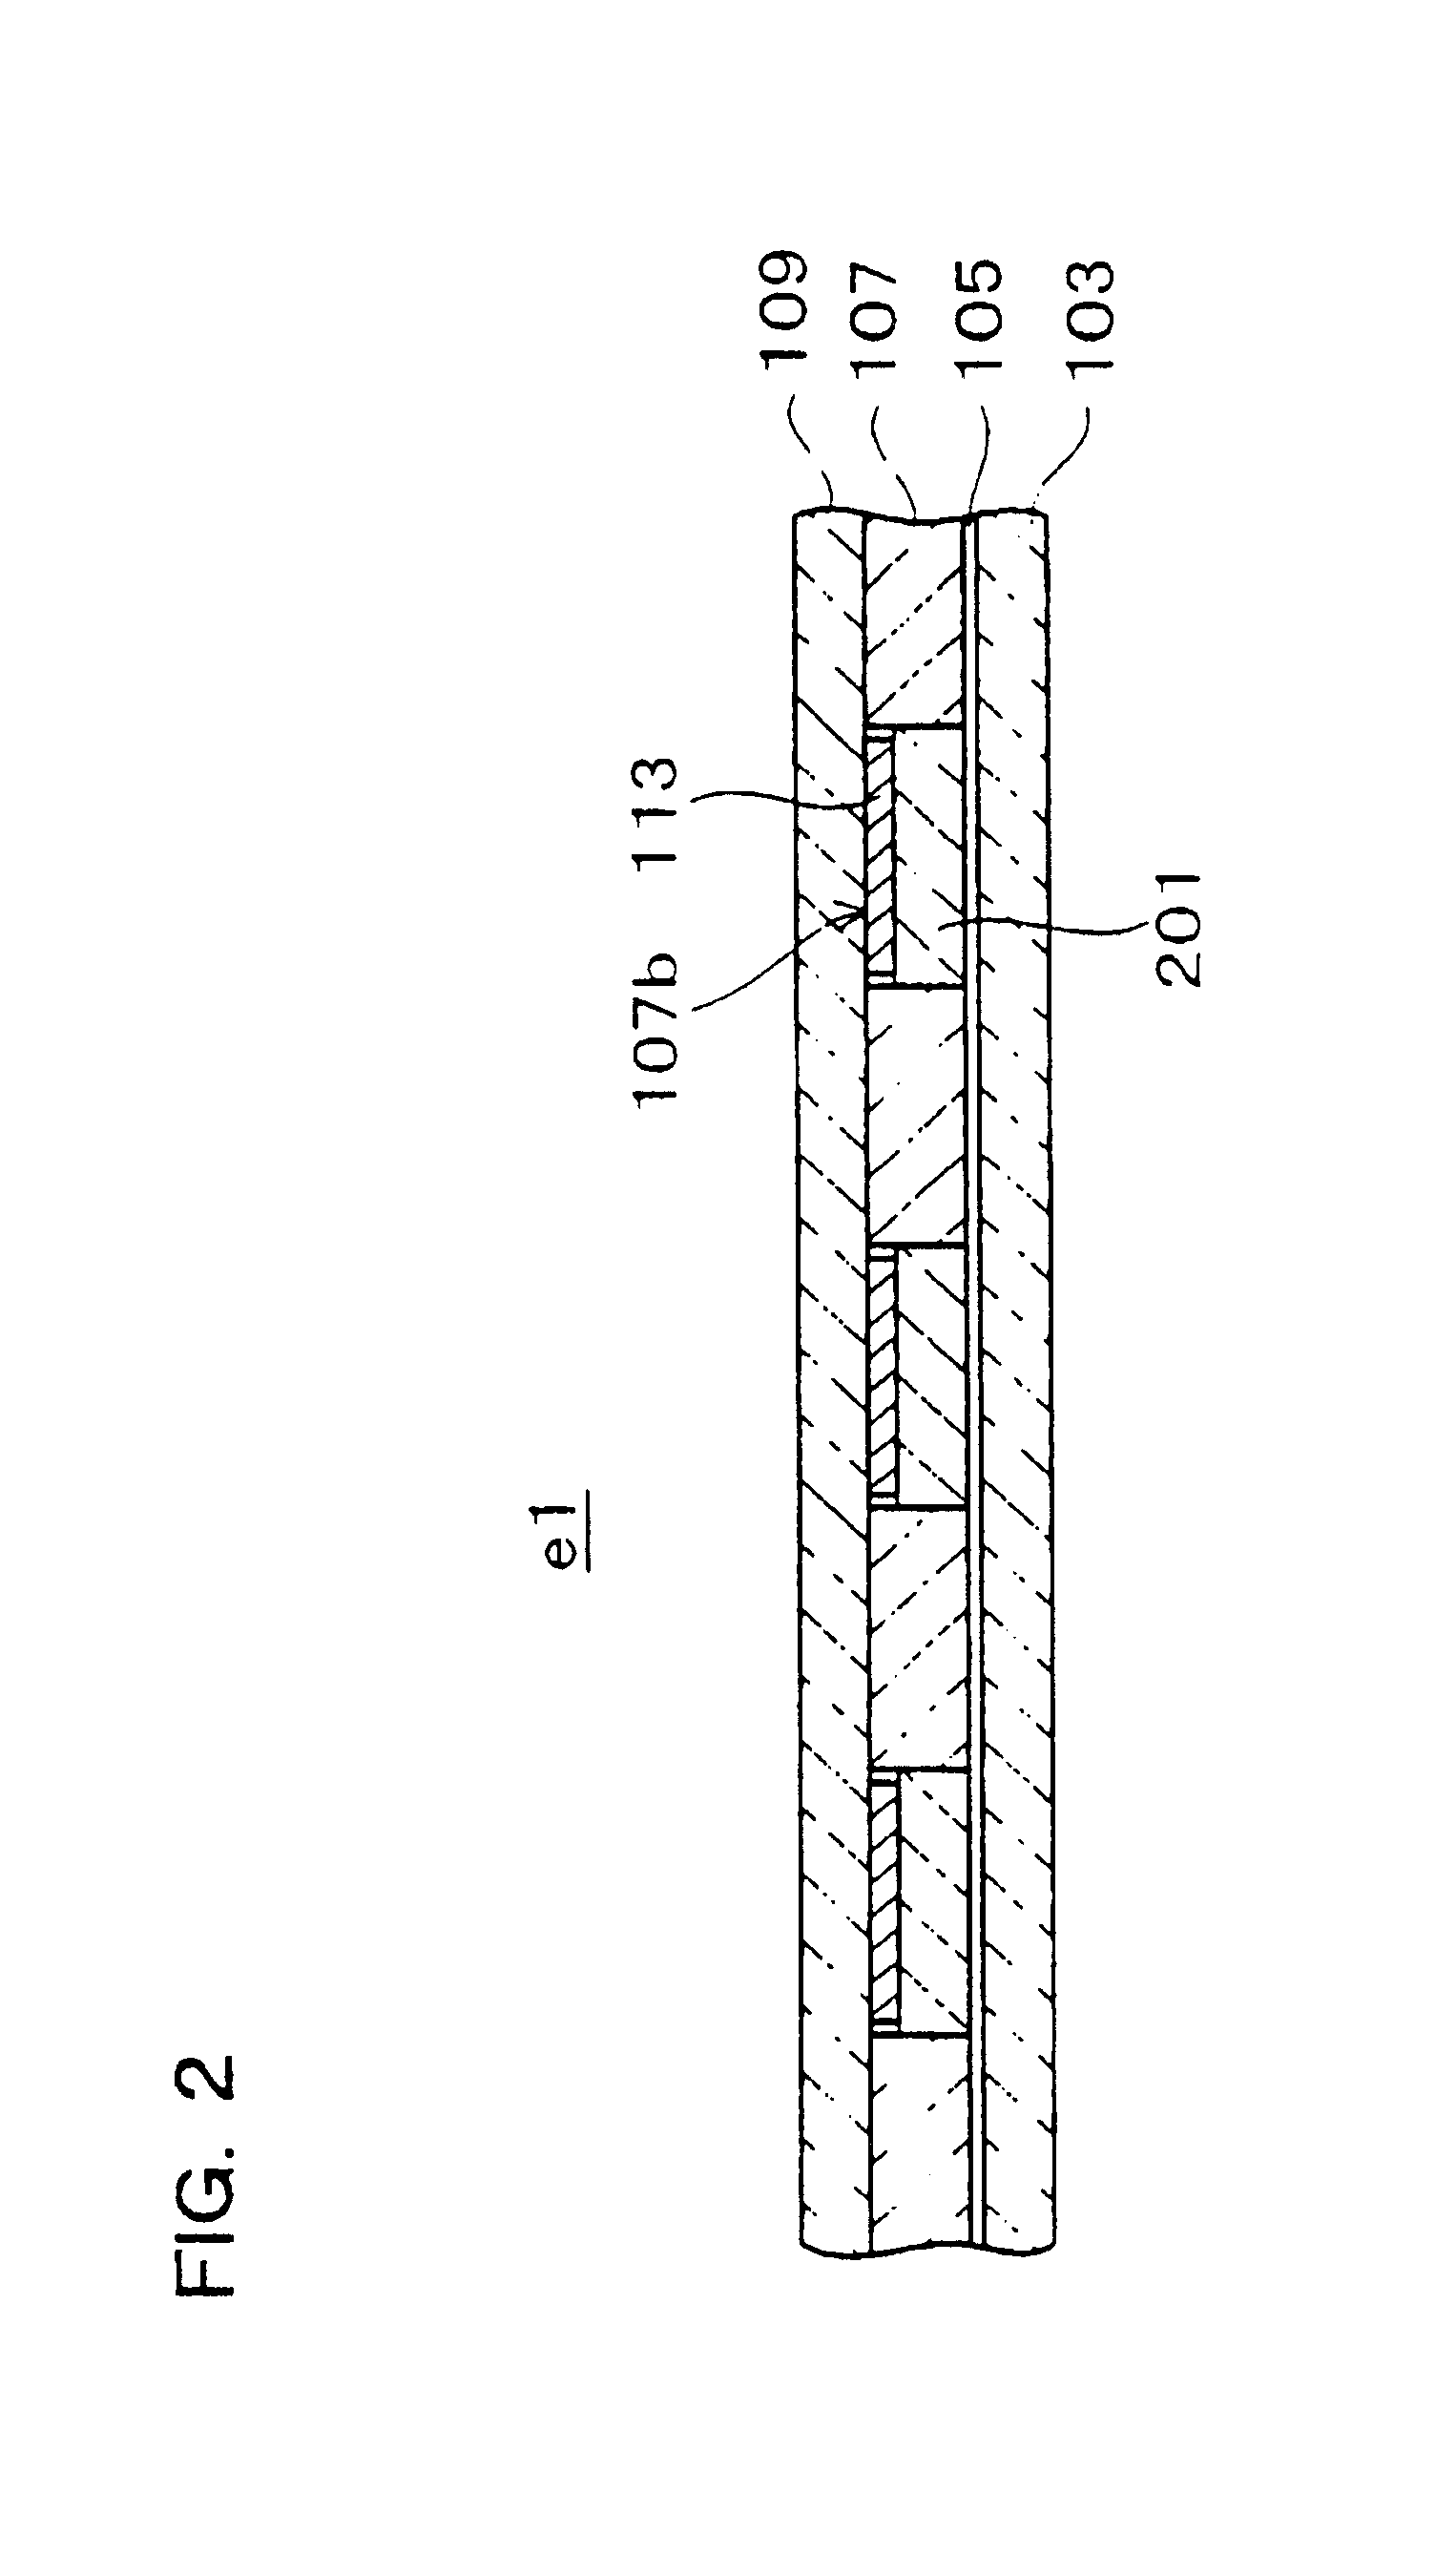 Method for manufacturing and batch testing semiconductor devices